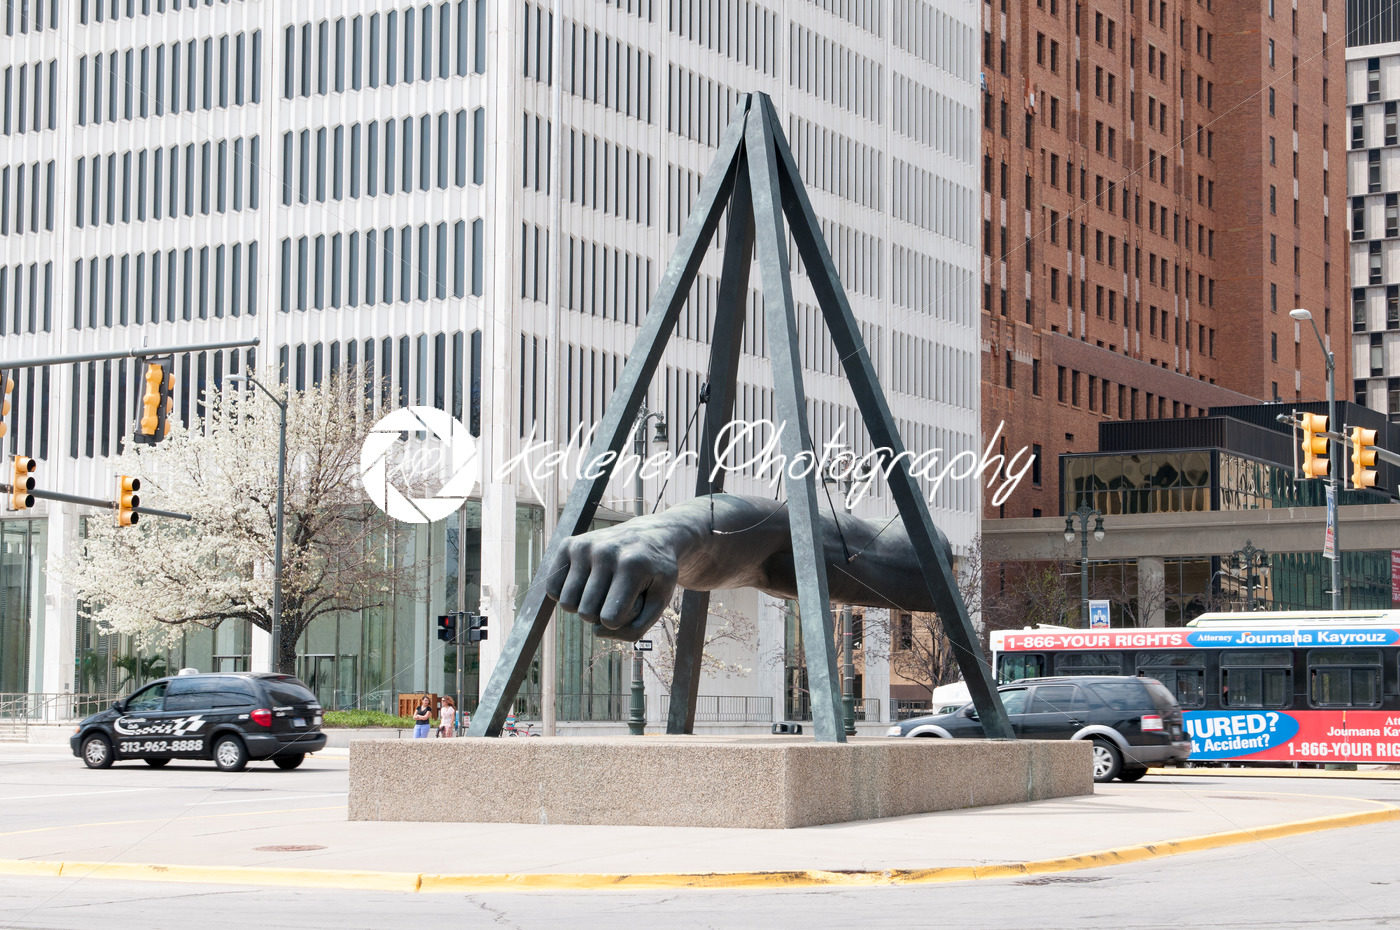 DETROIT, MI – MAY 8: The Fist, a monument to Joe Louis in Detroit, MI, shown here on May 8, 2014, is the work of sculptor Robert Graham. - Kelleher Photography Store